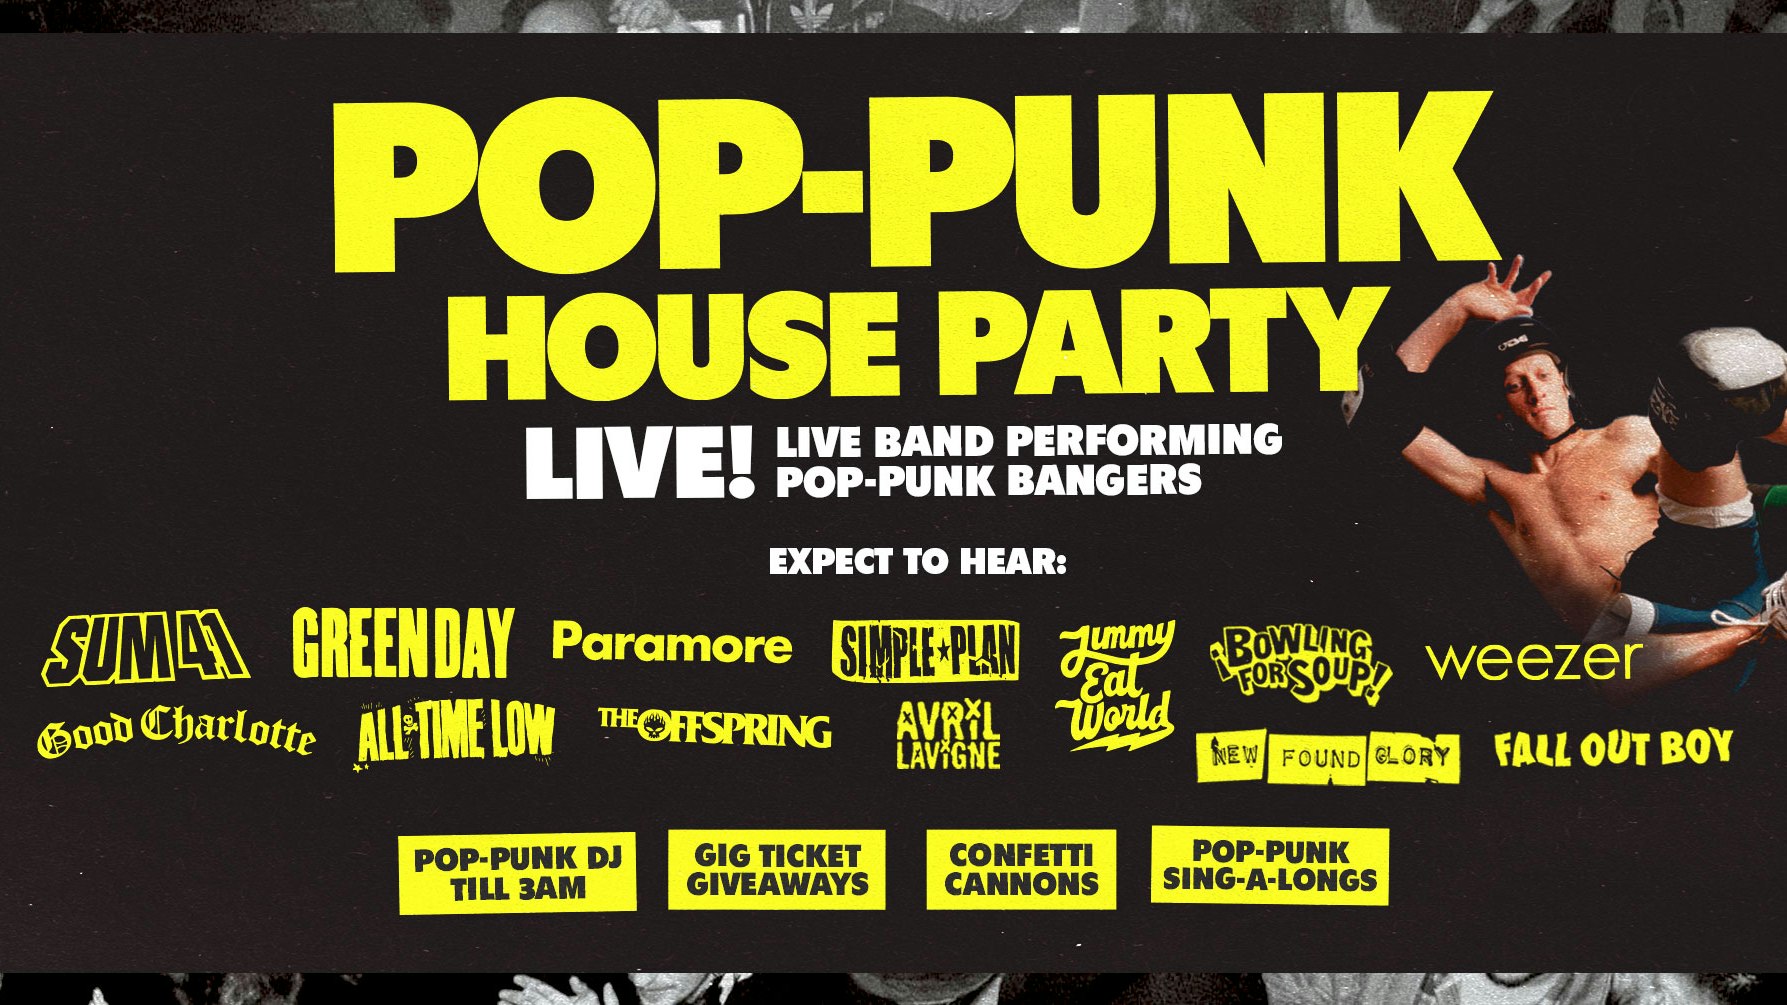 POP PUNK HOUSE PARTY – BLINK 182 TICKET GIVEAWAY!